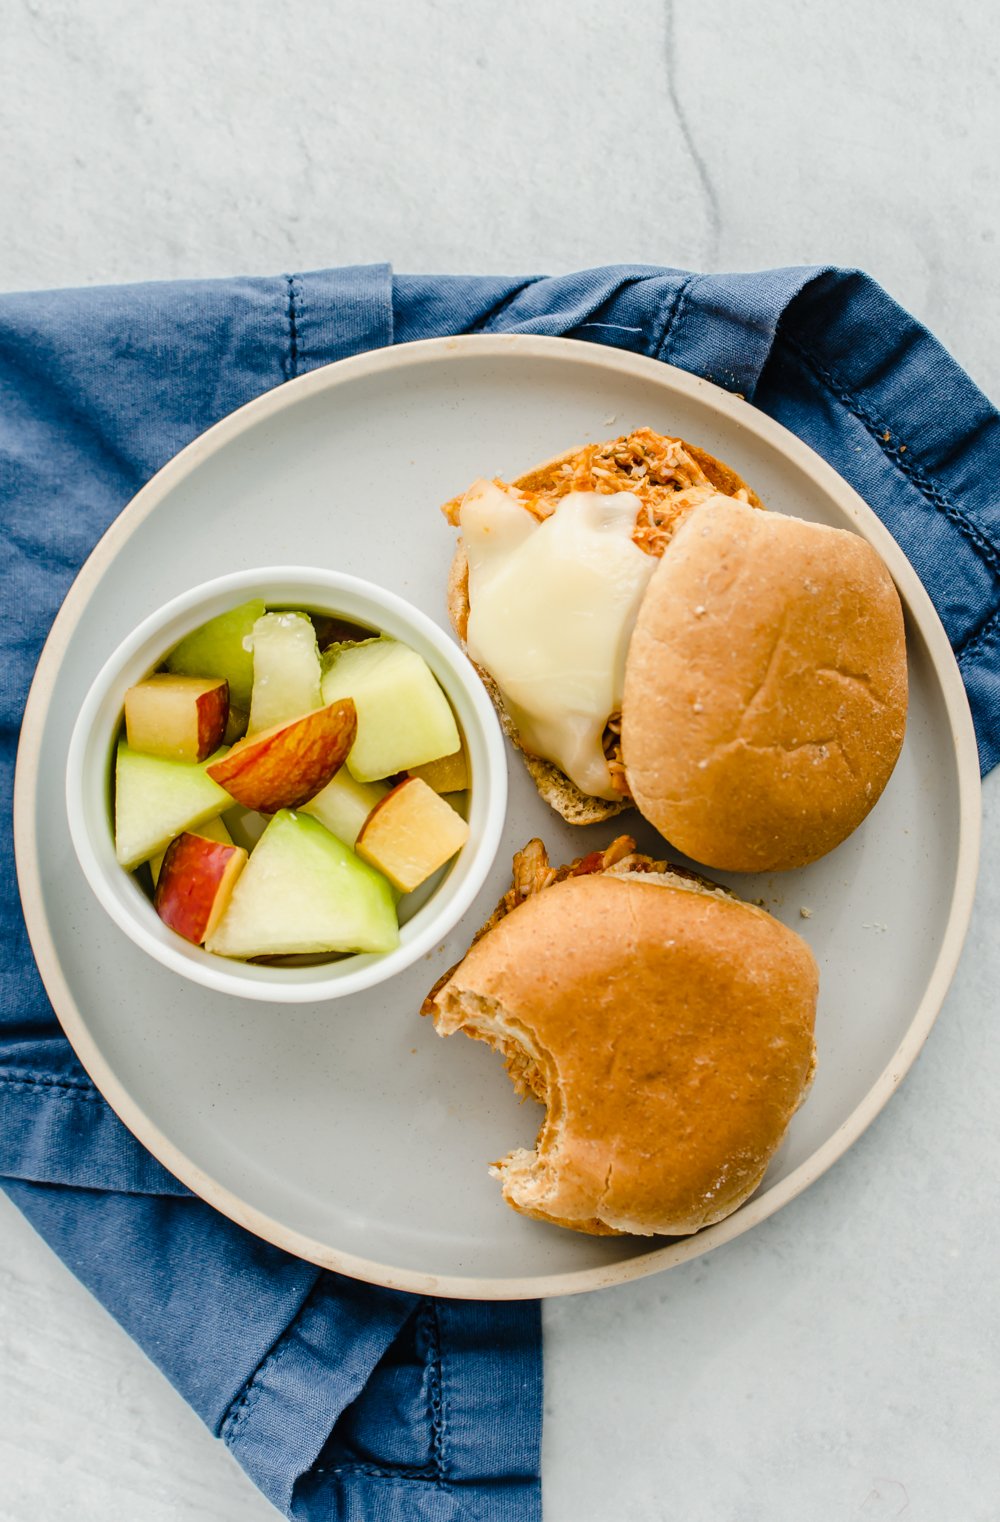 Two chicken Parmesan sliders on a white plate with a bowl of cut up fruit.